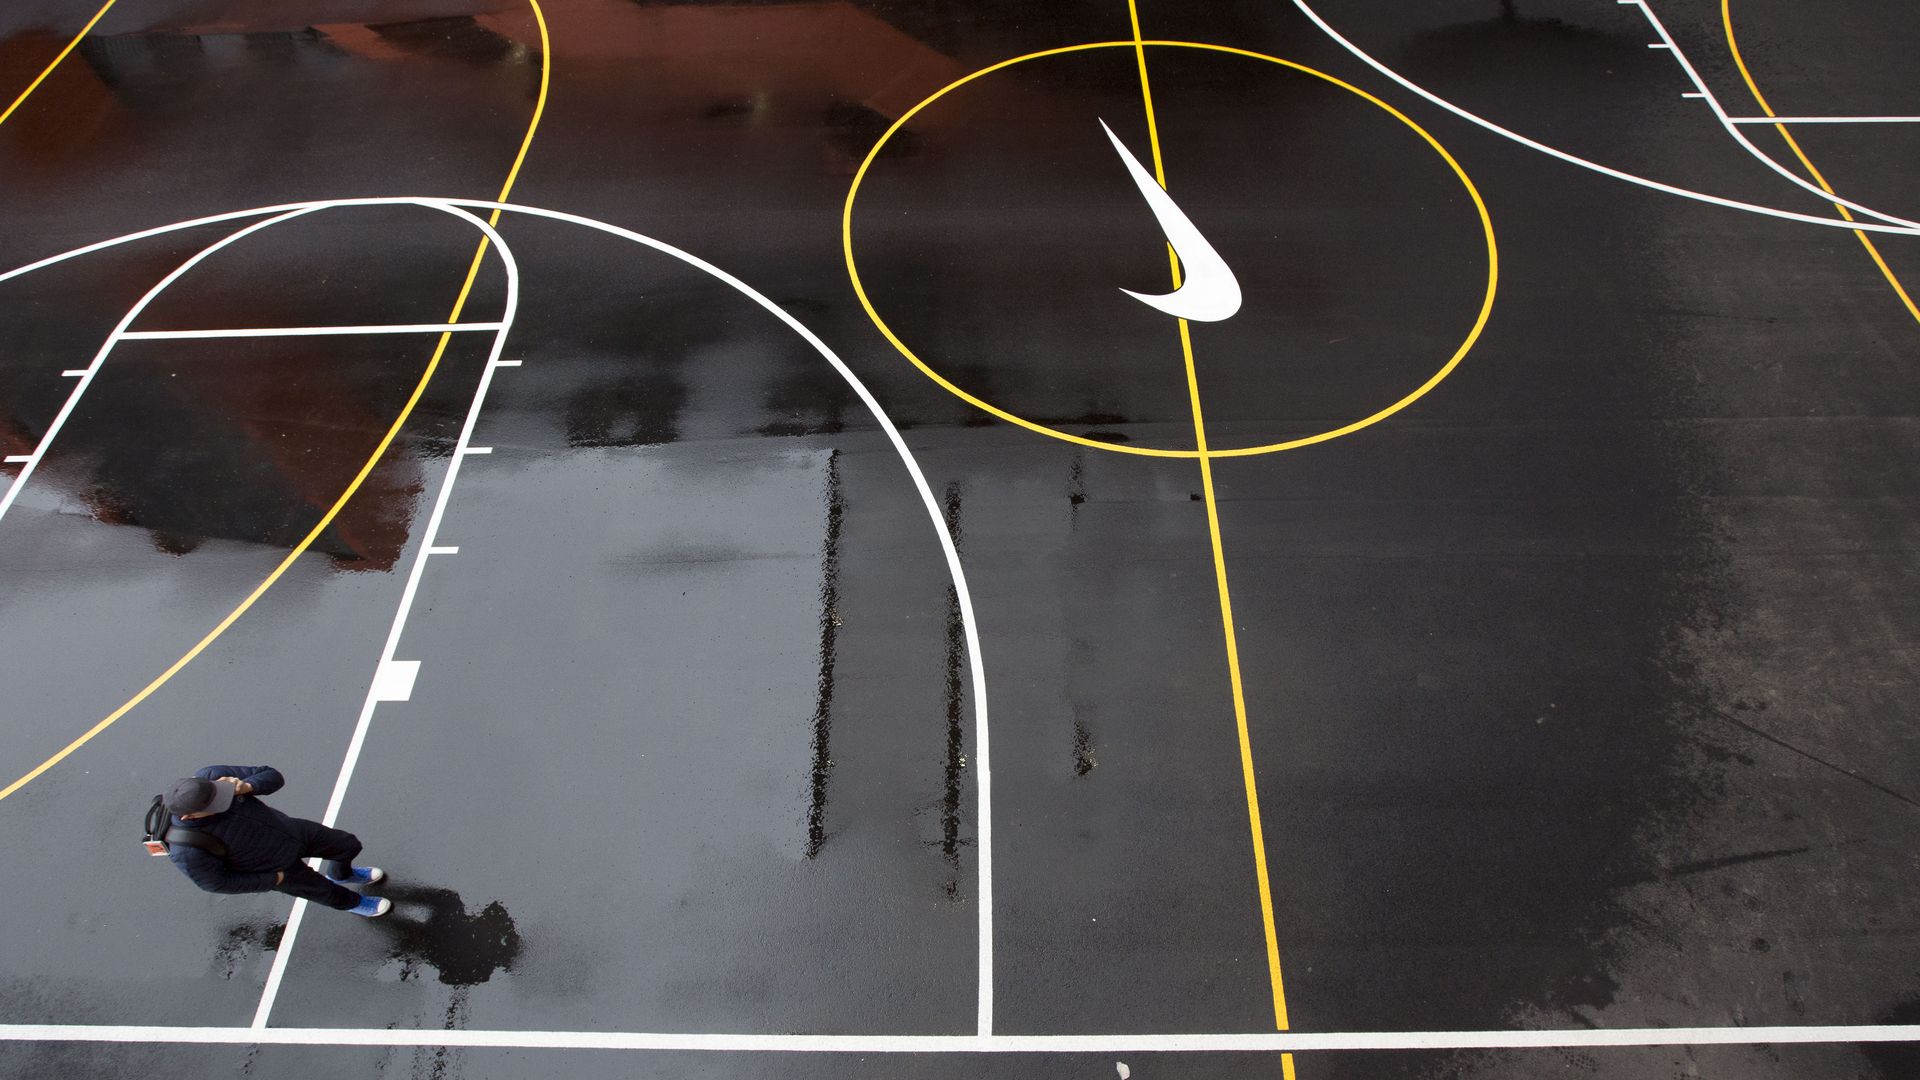 A man walks on a basketball court at Nike headquarters.